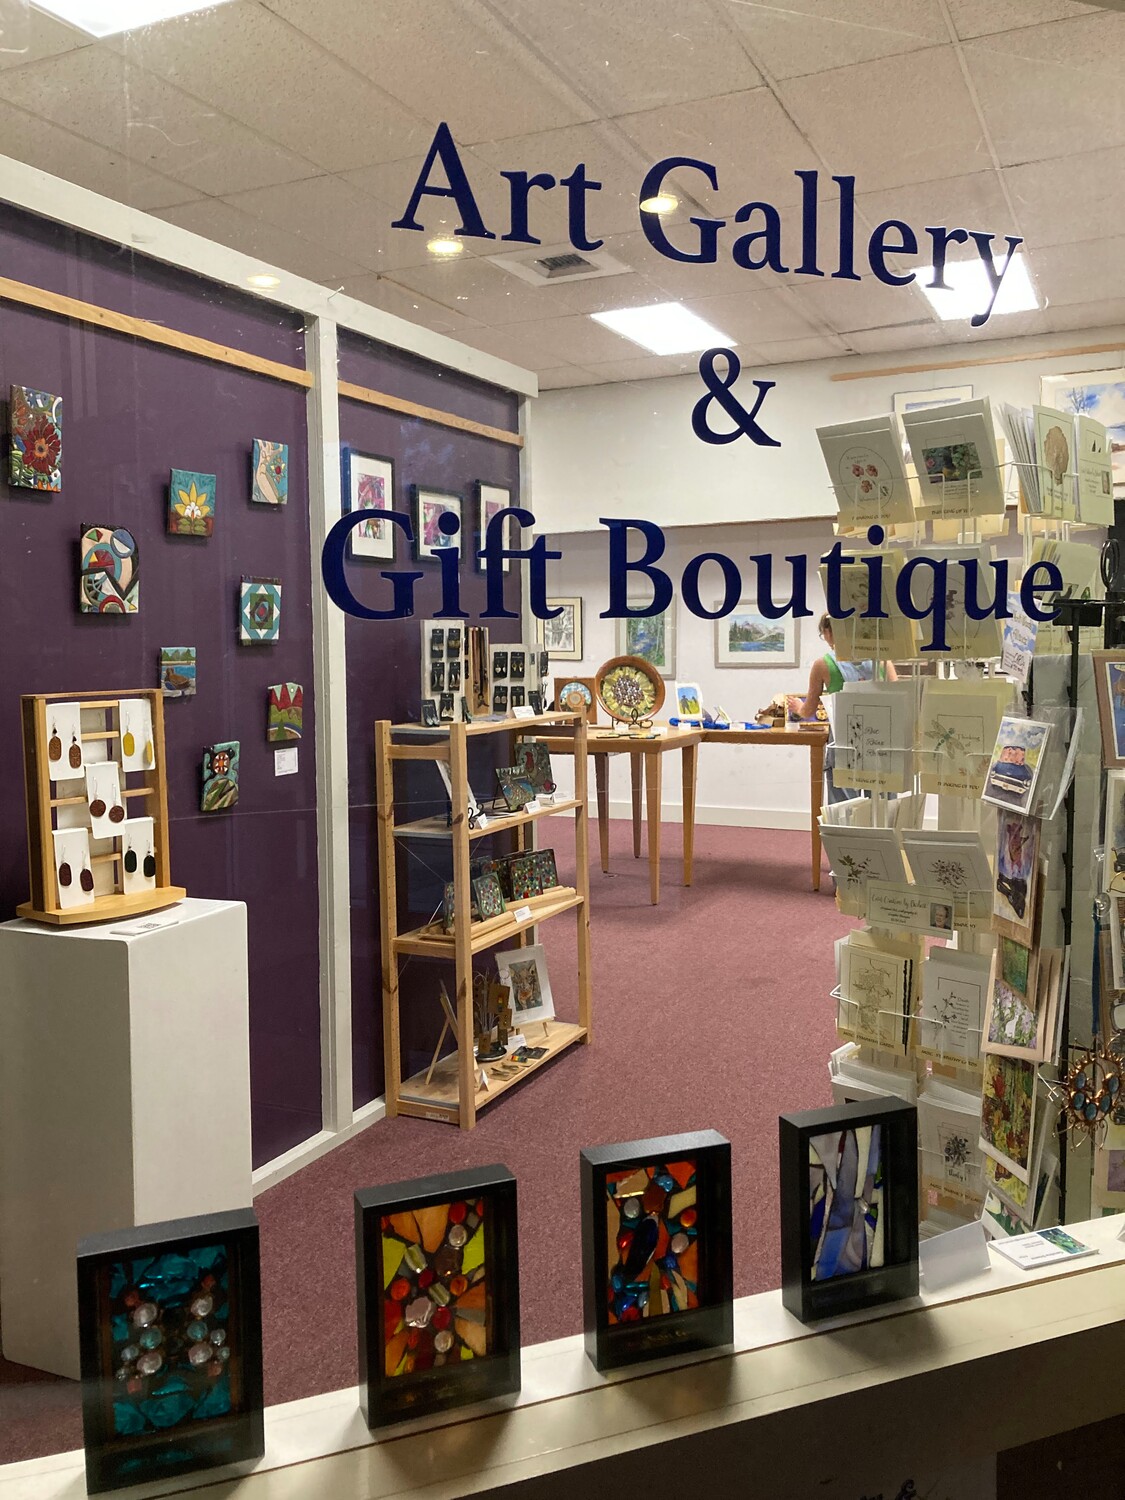 Art's House Gallery is located t 127 N. Main St., River Falls, in Riverwalk Square.